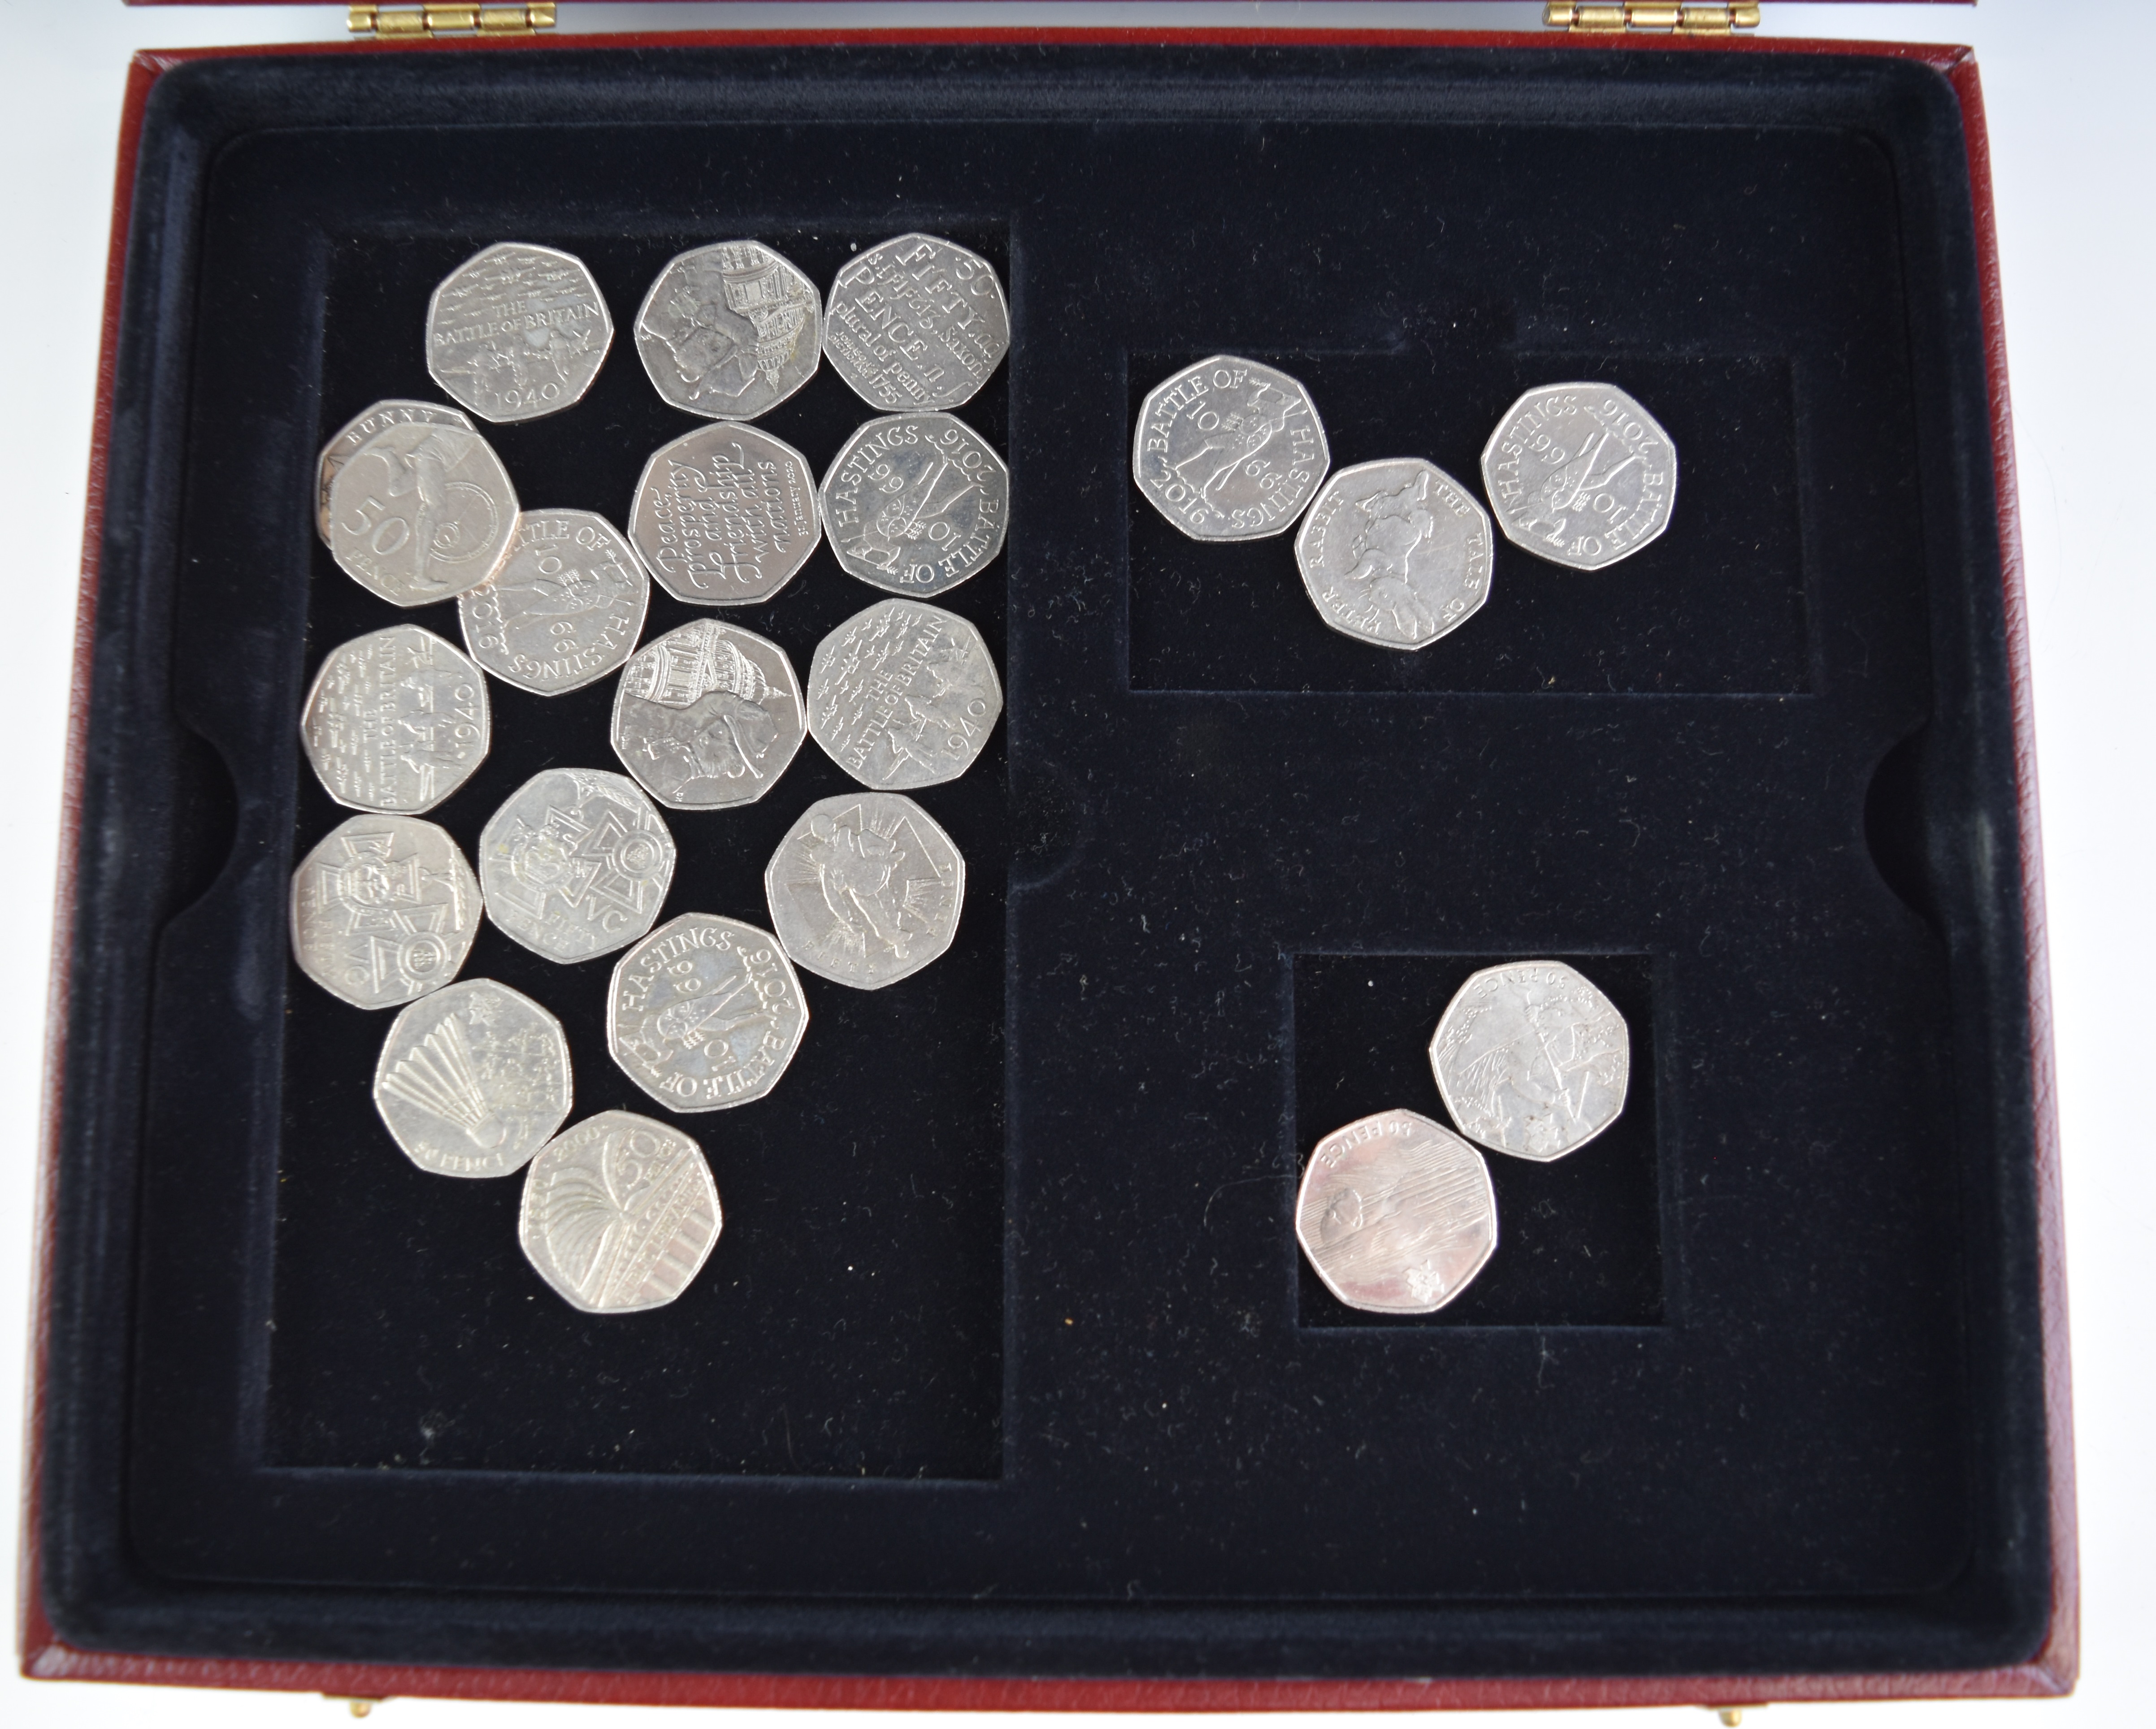 Collectable UK 50p coins including Olympics, in collector's case together with a colourised Euro - Image 3 of 4